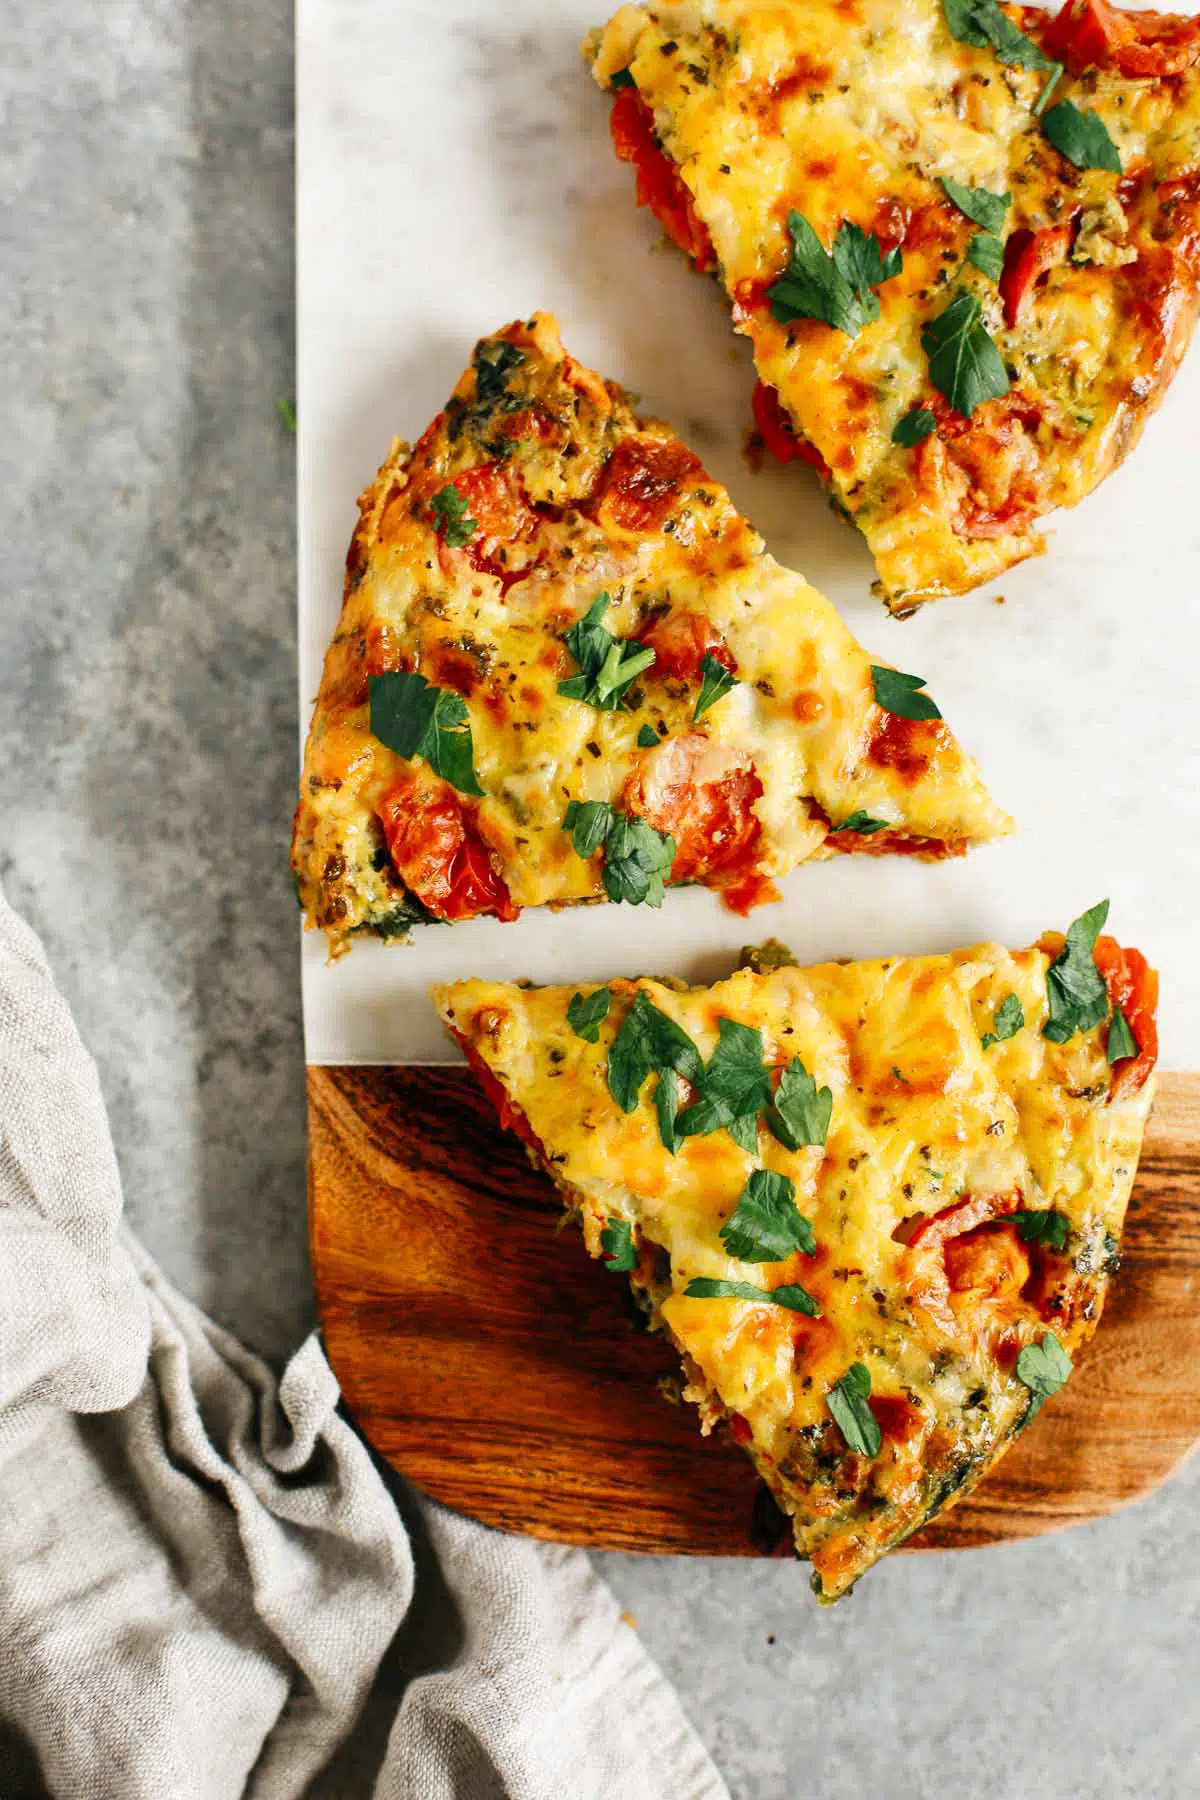 vegetable frittata cut into pieces on a wooden serving board